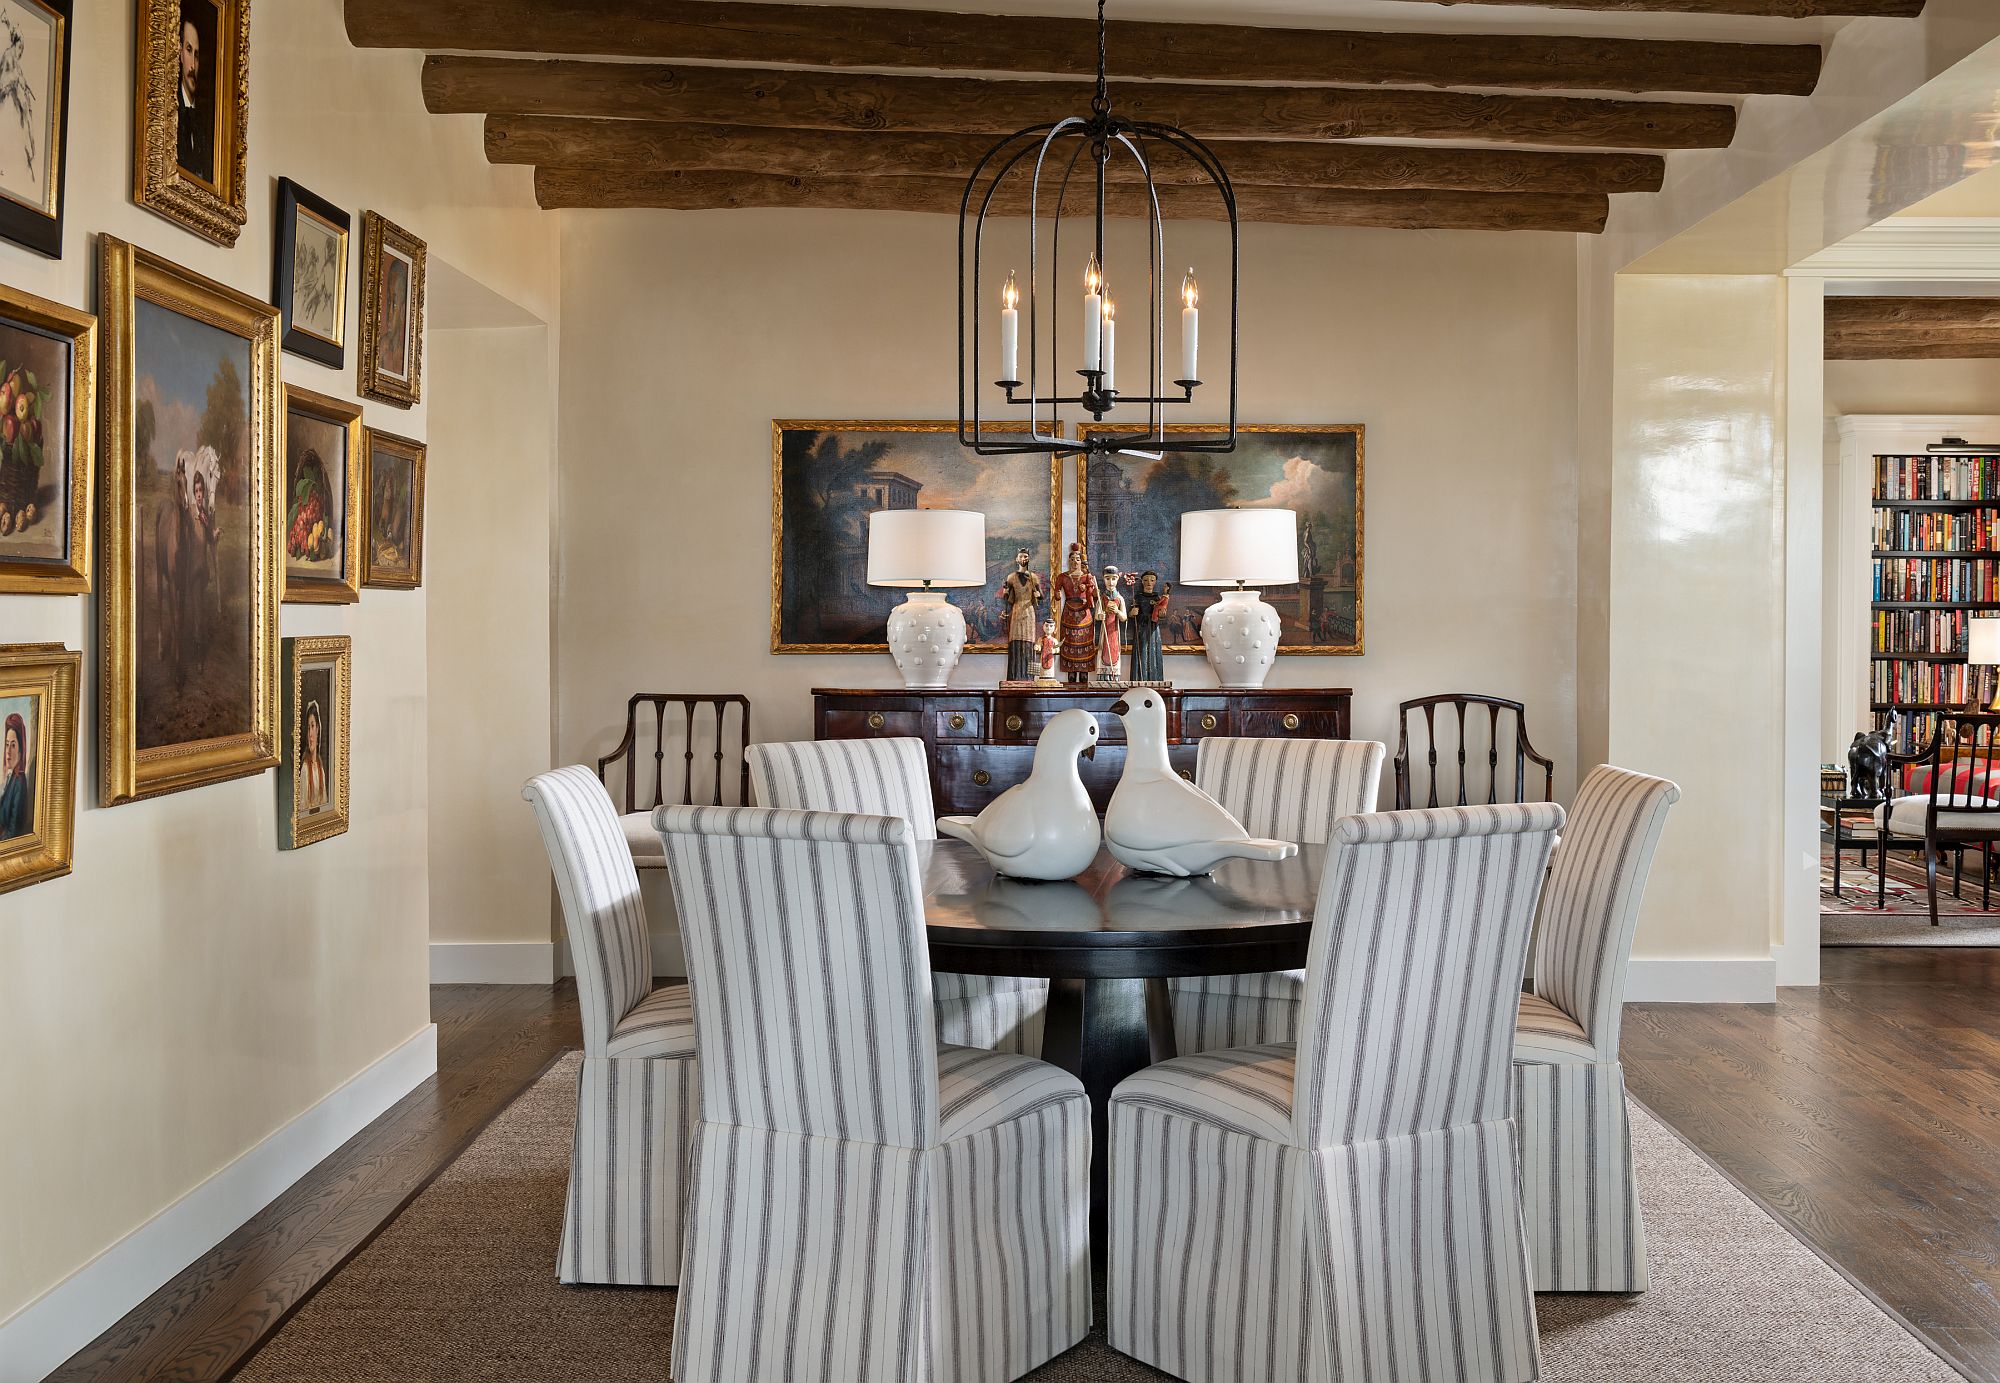 Gallery wall adds character to the dining space